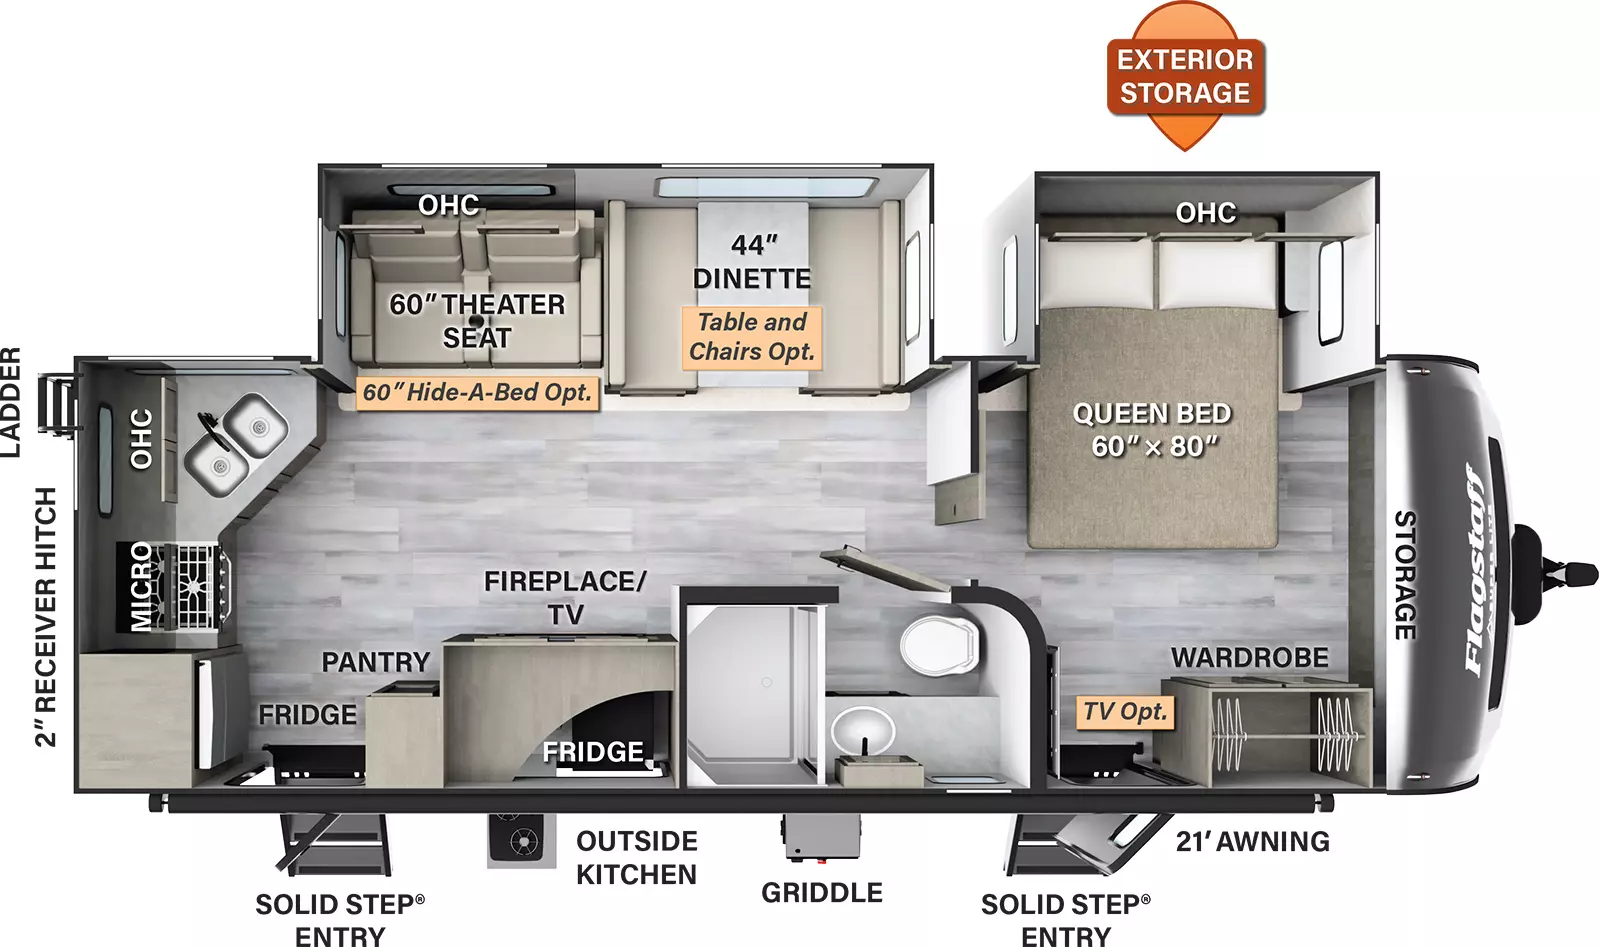 The 26RKBS has two slide outs on the off-door side, along with two entry doors. Exterior features include a 21 foot awning, outside kitchen, exterior storage, griddle, rear ladder, and 2 inch receiver hitch. Interior layout from front to back: front bedroom with front storage, door side entry and wardrobe, and off-door side queen bed slide out with overhead cabinets (TV optional); side aisle bathroom on door side; off-door side slide out with dinette (table and chairs optional) and theater seating (hide a bed optional); door side entertainment center with TV and fireplace below, pantry and second entry; rear kitchen with double sink, microwave, stove, refrigerator, and overhead cabinets.